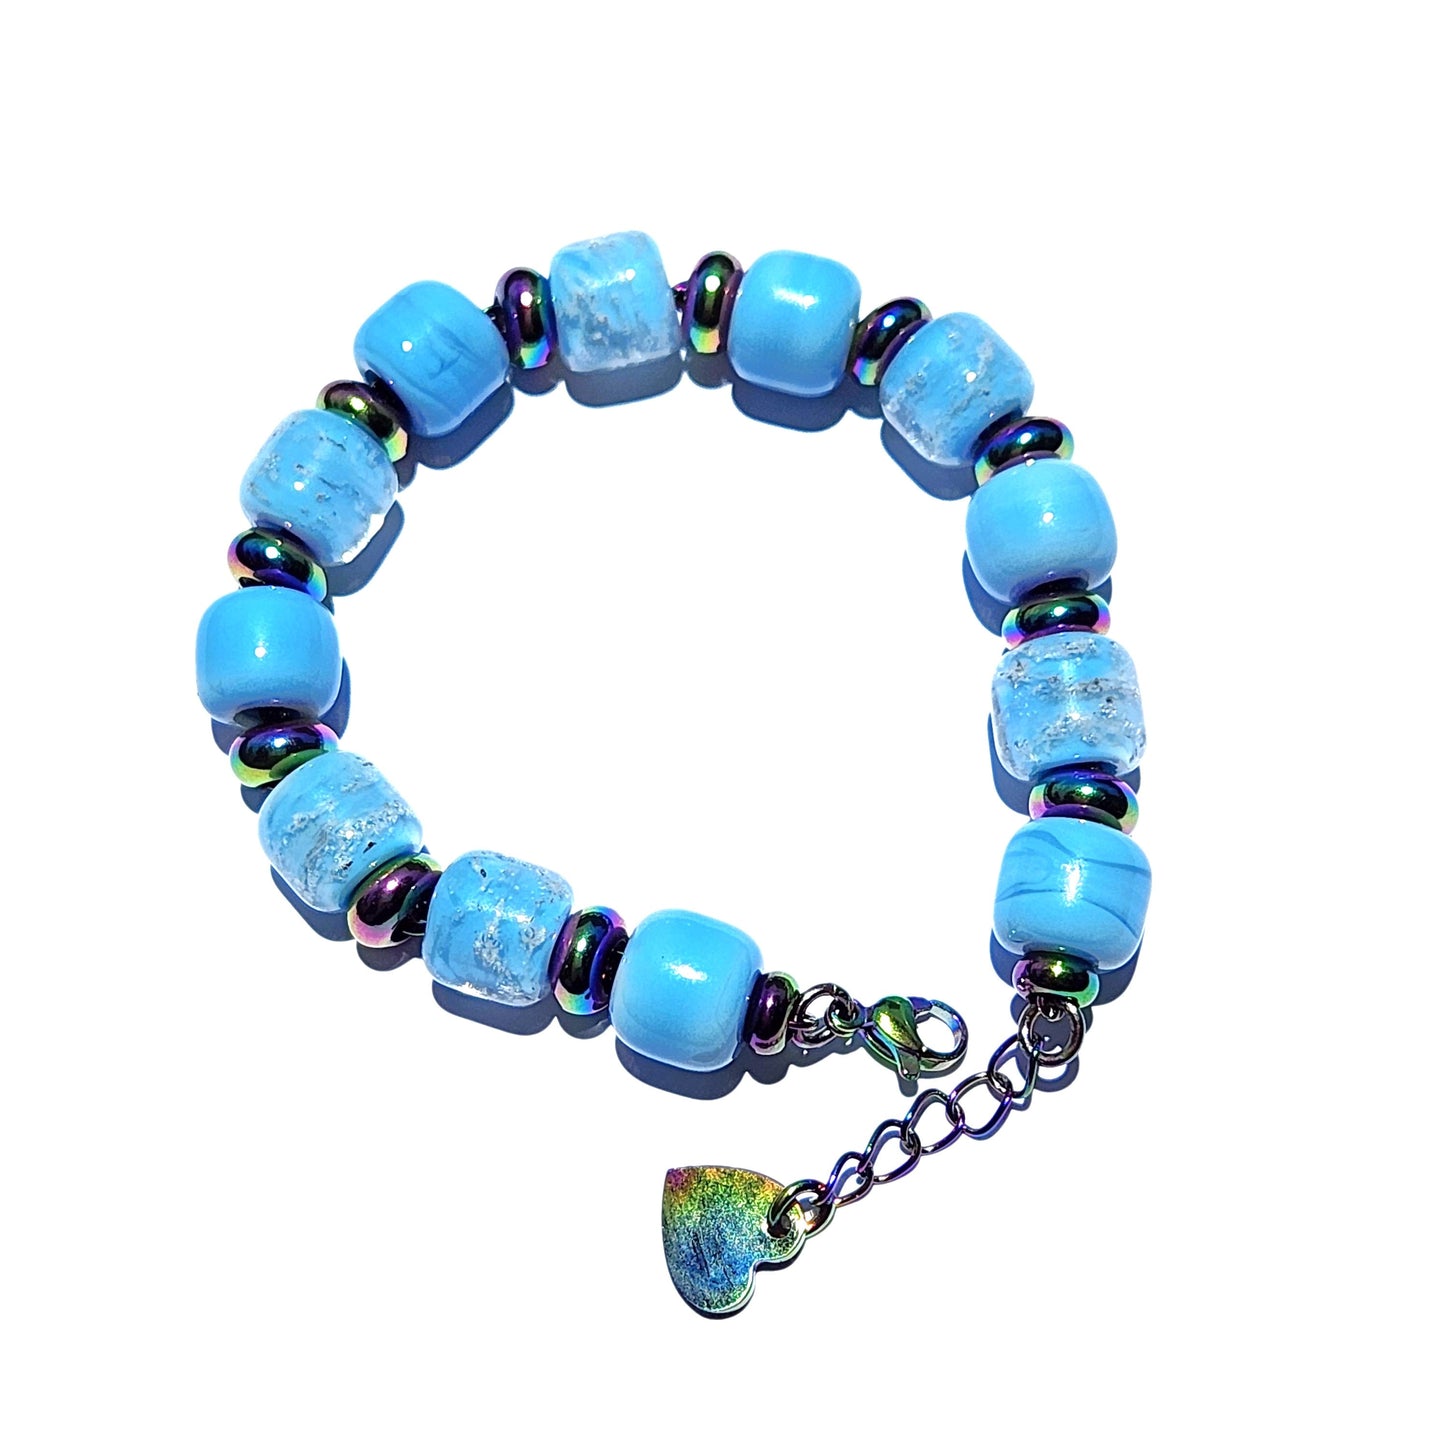 Eternal Cremation Bracelet With 6 Ash Beads - Sky Blue-Cremation Beads-DragonFire Glass-Multi-color-DragonFire Glass Cremation Jewelry